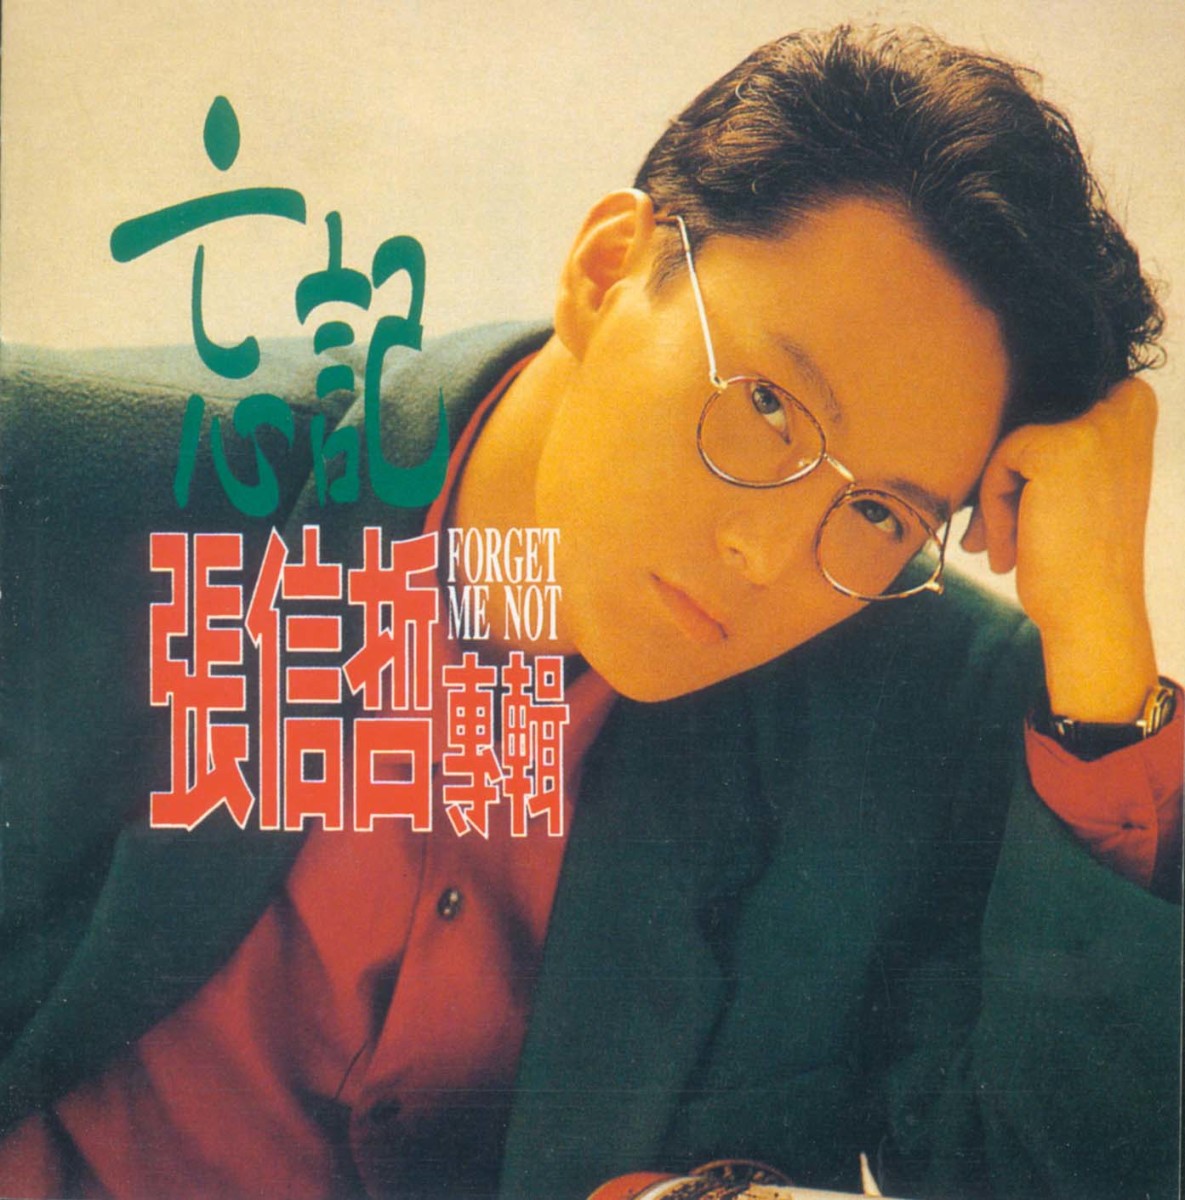 jeff-chang-s-discography